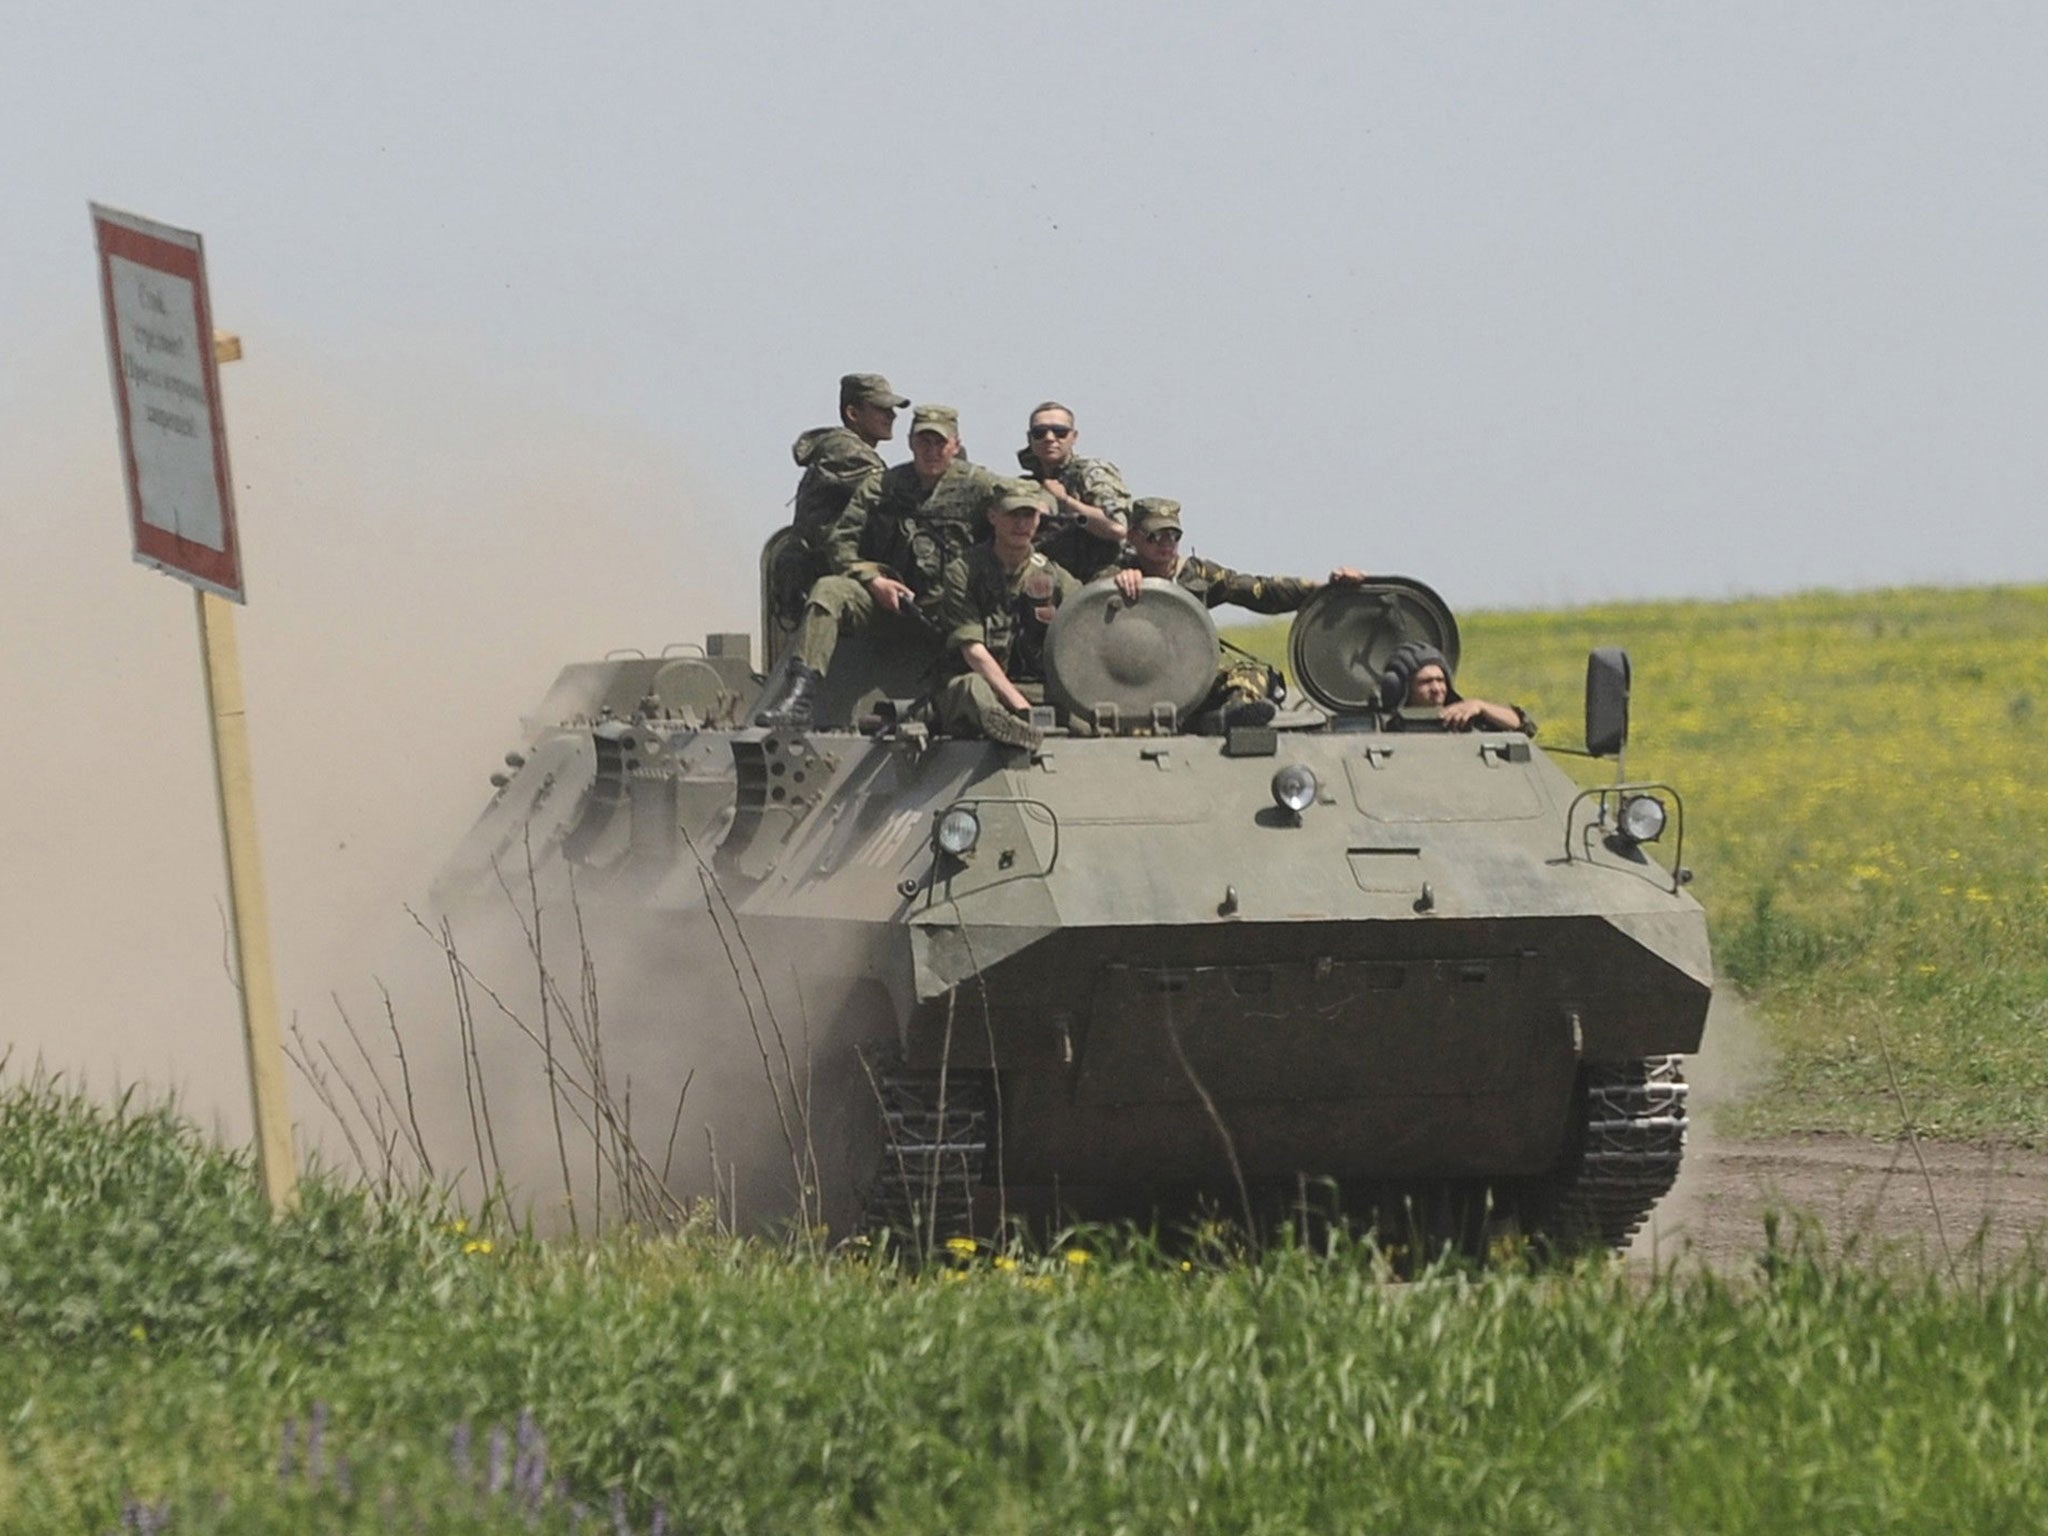 Men wearing military uniforms ride atop an armoured personnel carrier (APC) during exercises at the Kuzminsky military training ground near the Russian-Ukrainian border in Rostov region